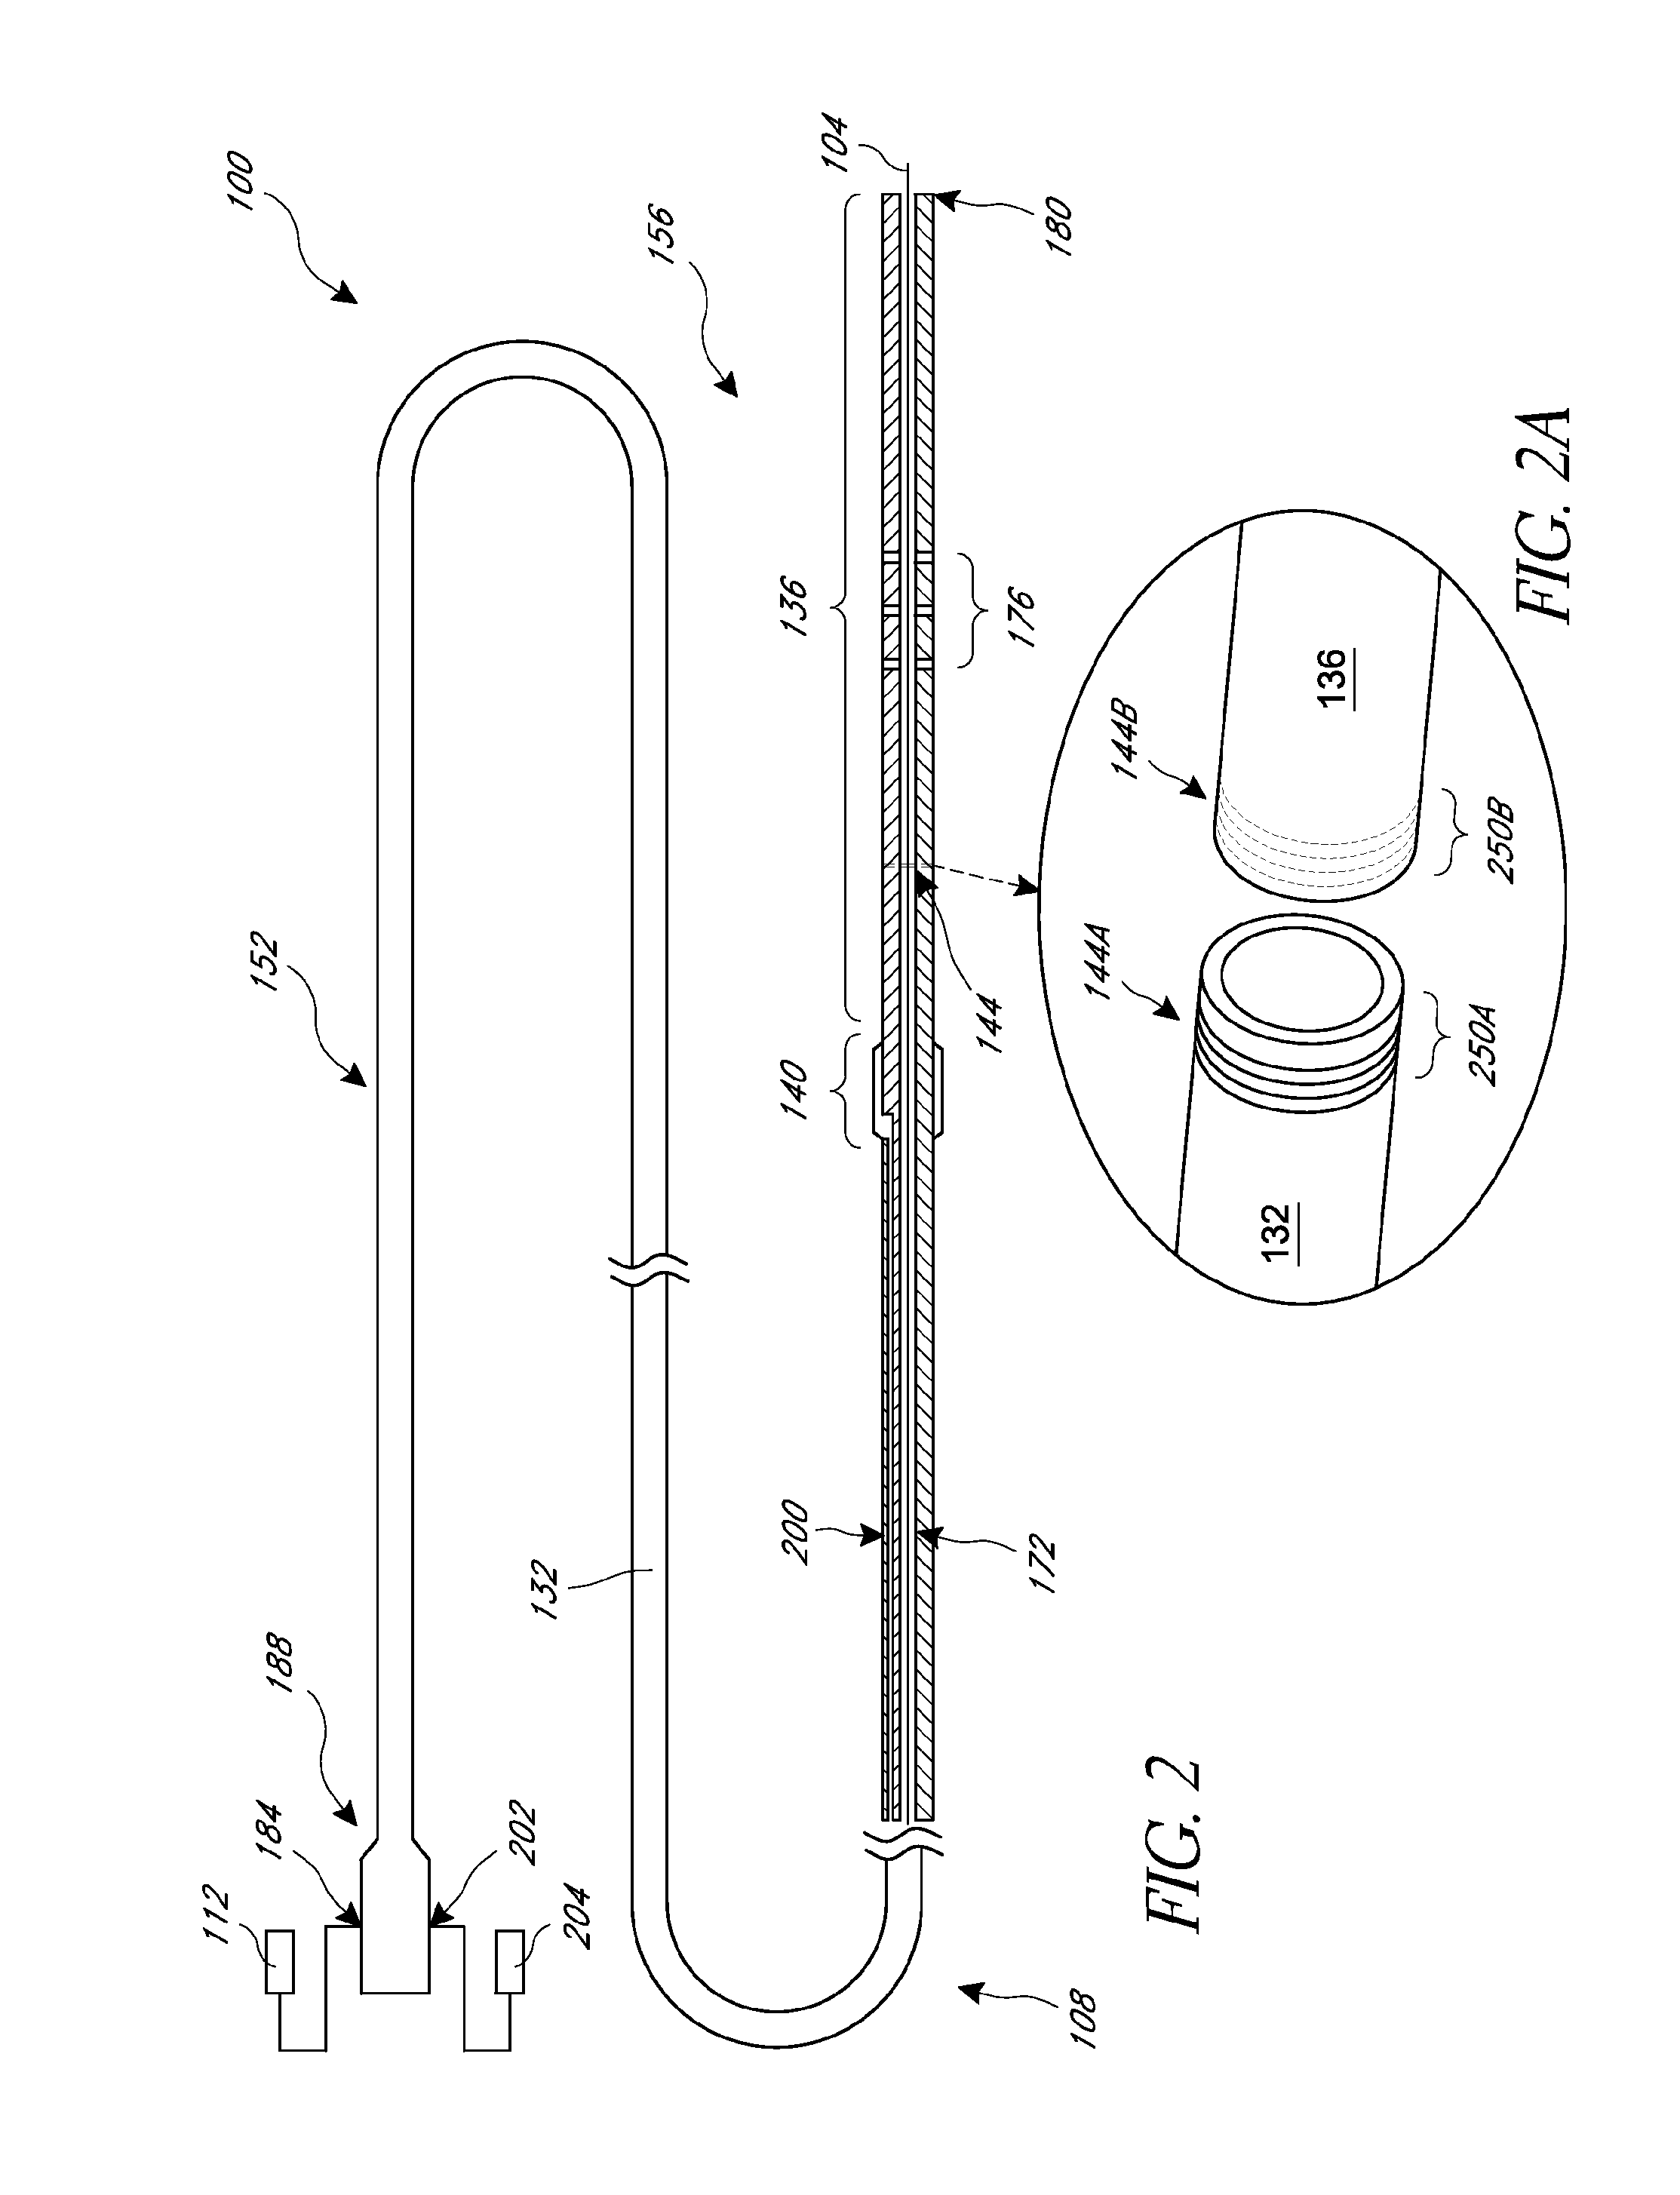 Left atrial appendage occlusion devices and methods